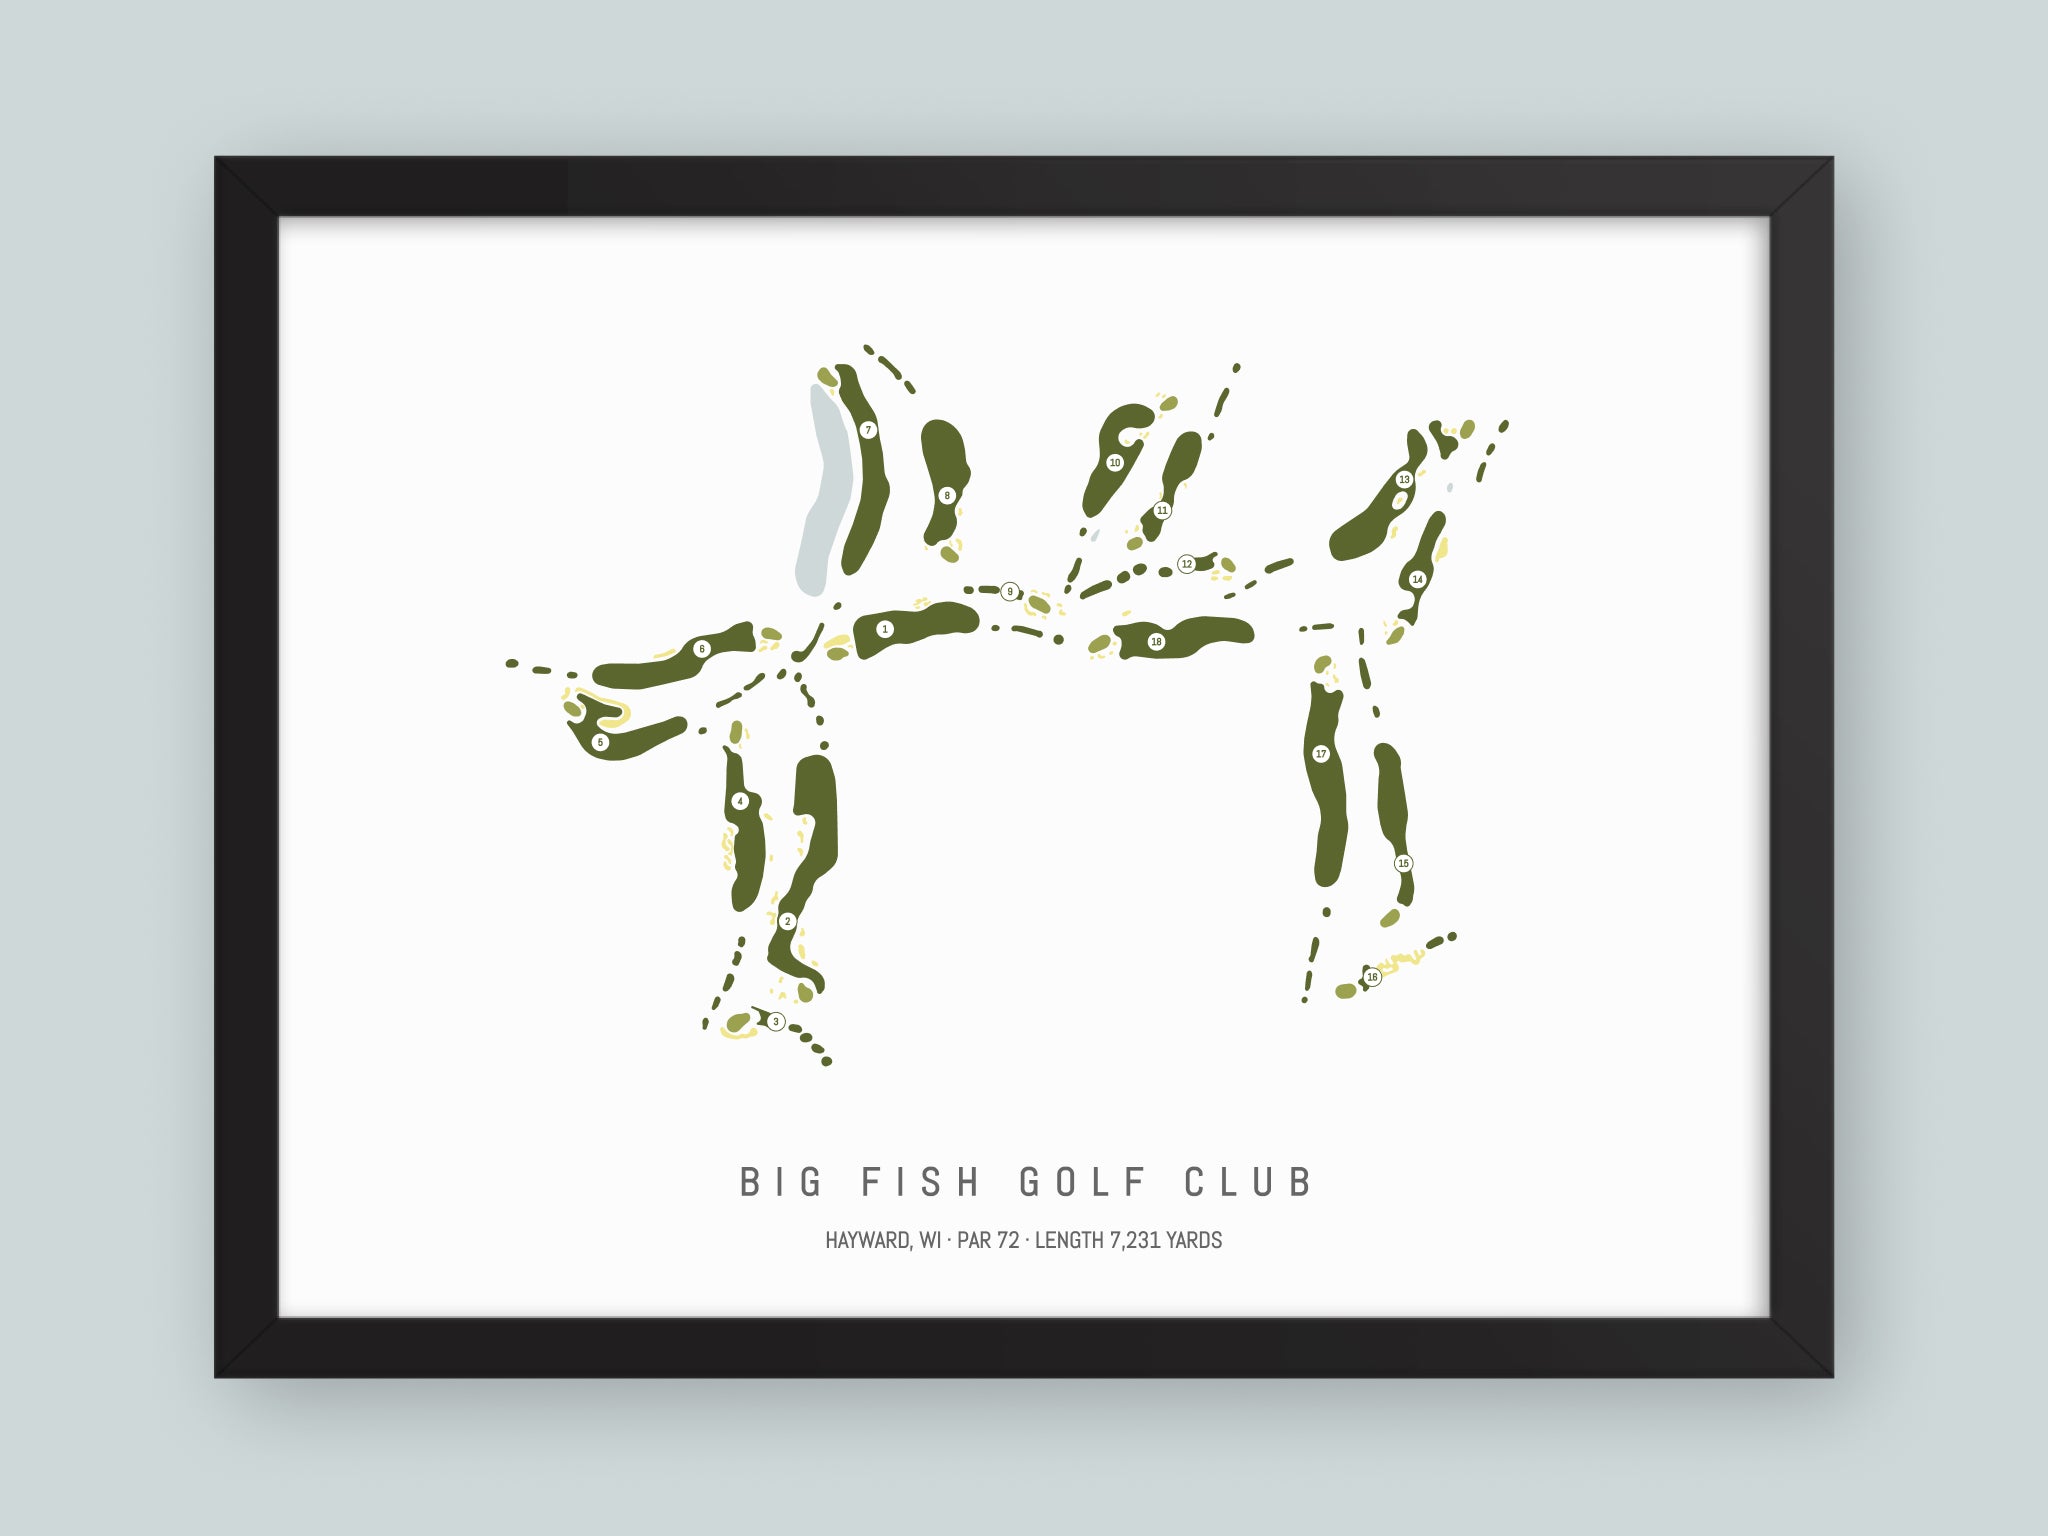 Big-Fish-Golf-Club-WI--Black-Frame-24x18-With-Hole-Numbers